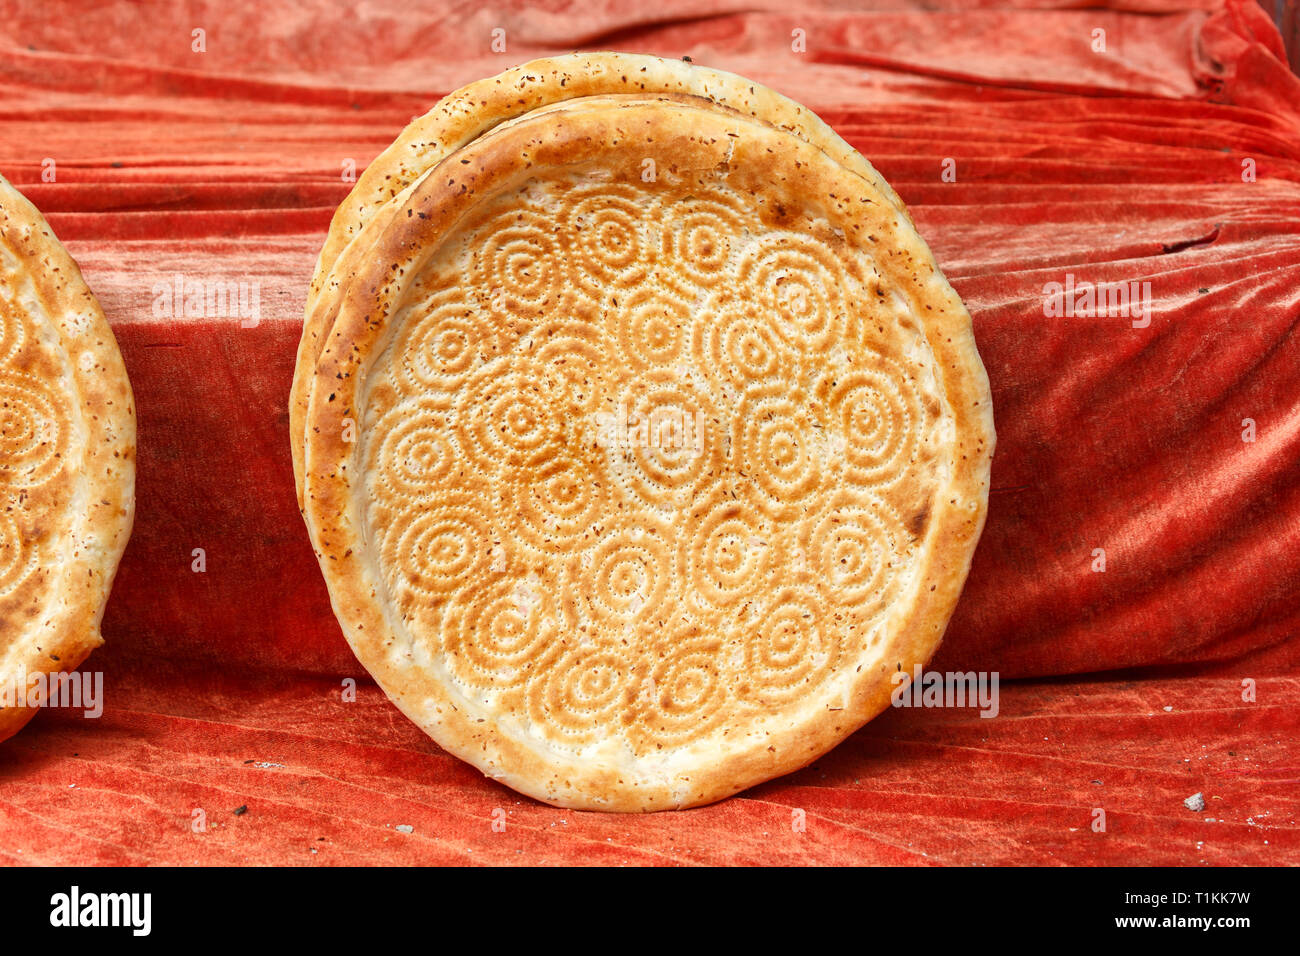 KASHGAR, XINJIANG / CHINA - October 2, 2017: Uighur flat bread on display for sale, waiting to be bought by a hungry customer. Stock Photo